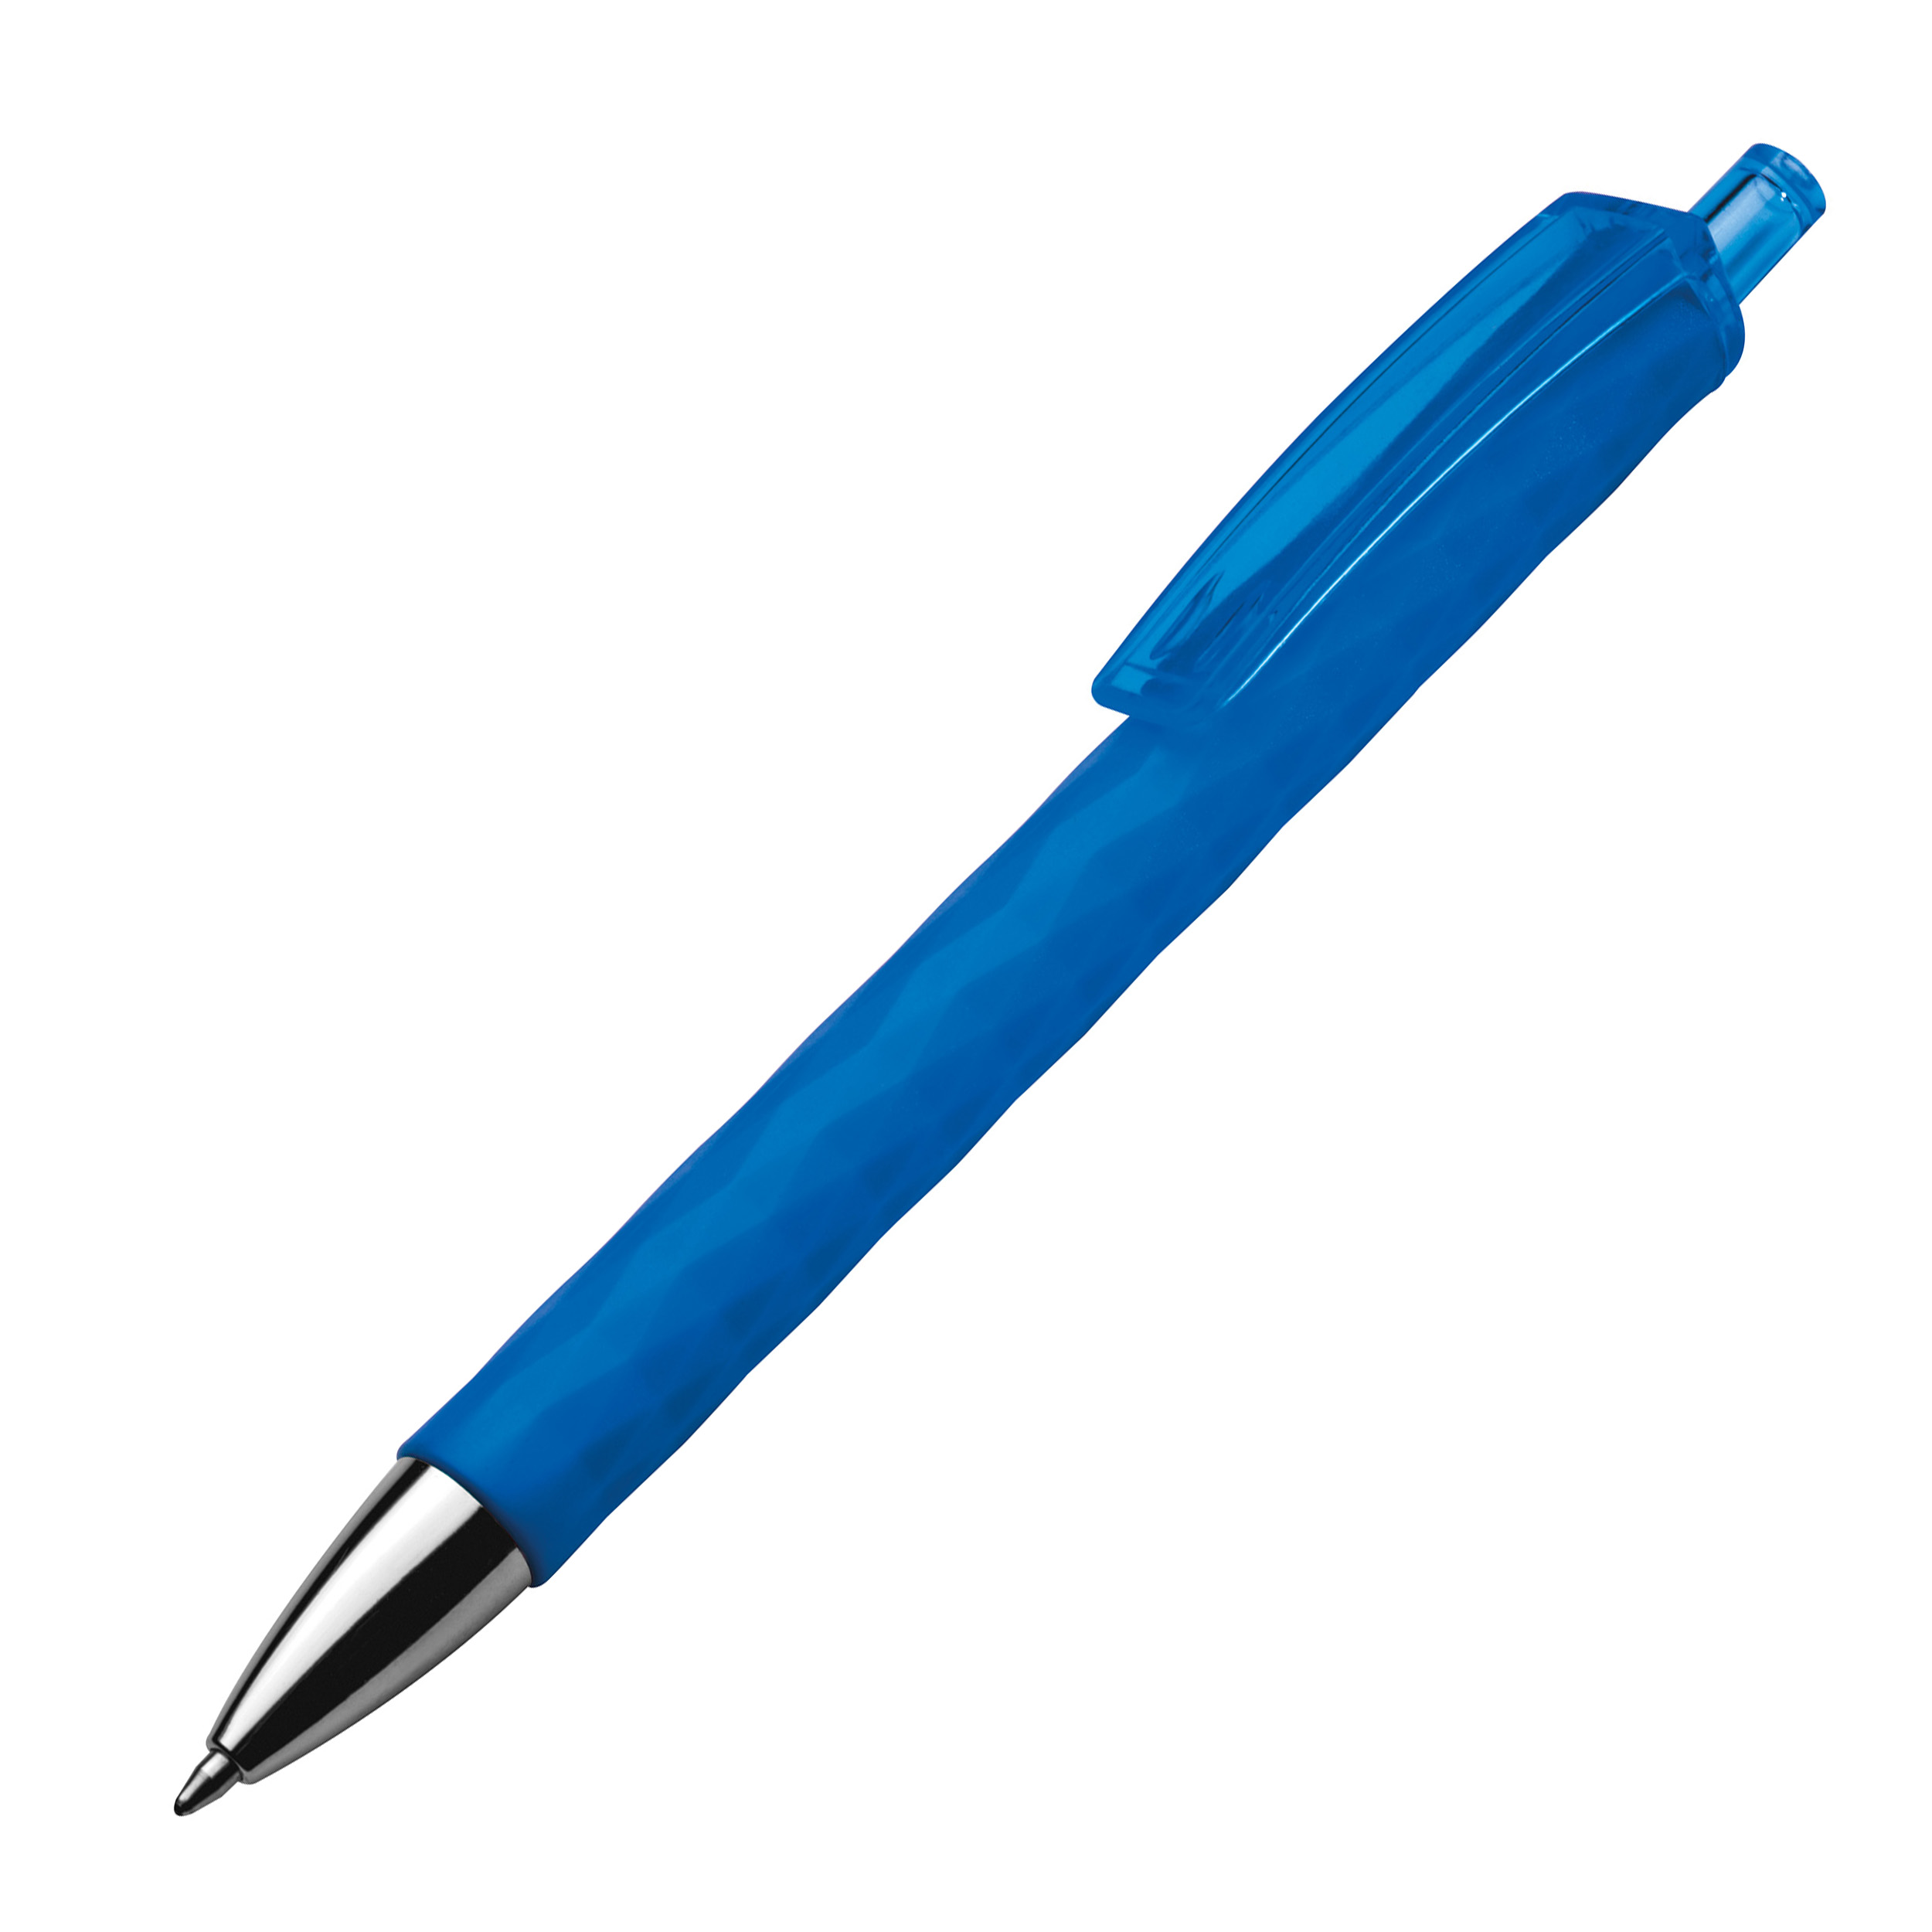 A plastic ballpoint pen with a printed Essex logo - Forest Row